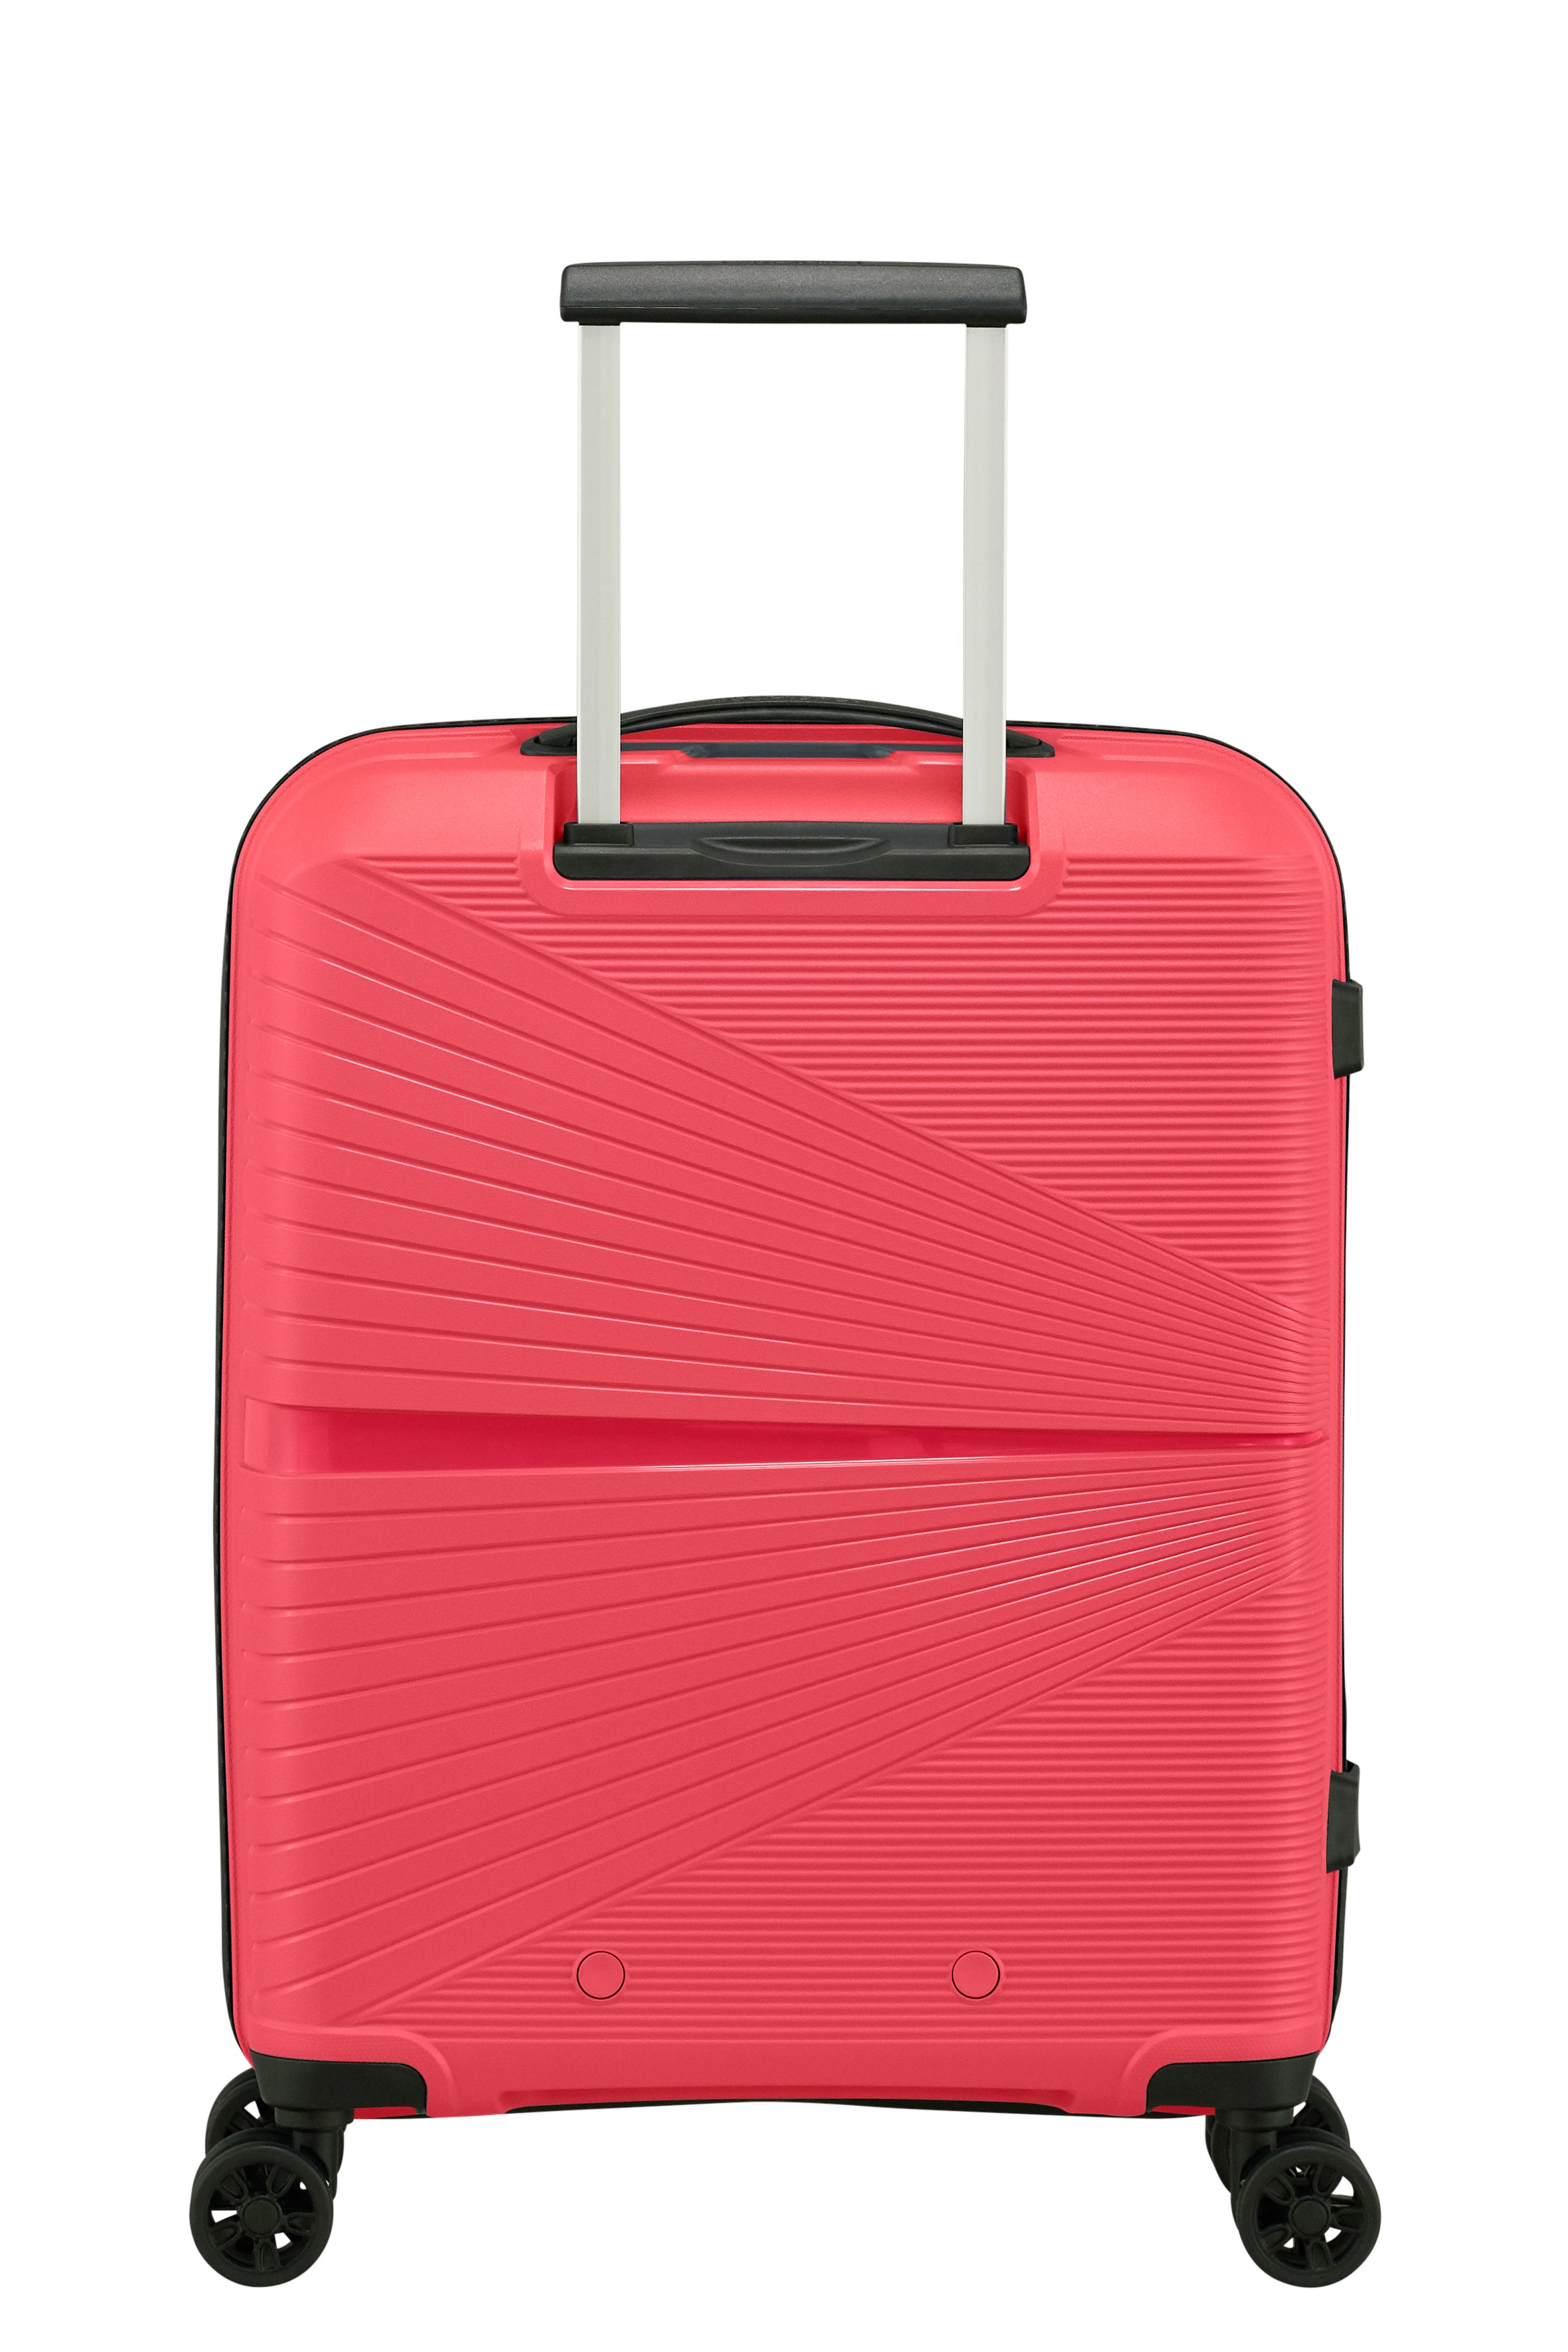 American Tourister - Airconic 55cm Small 4 Wheel Hard Suitcase - Paradise Pink-3